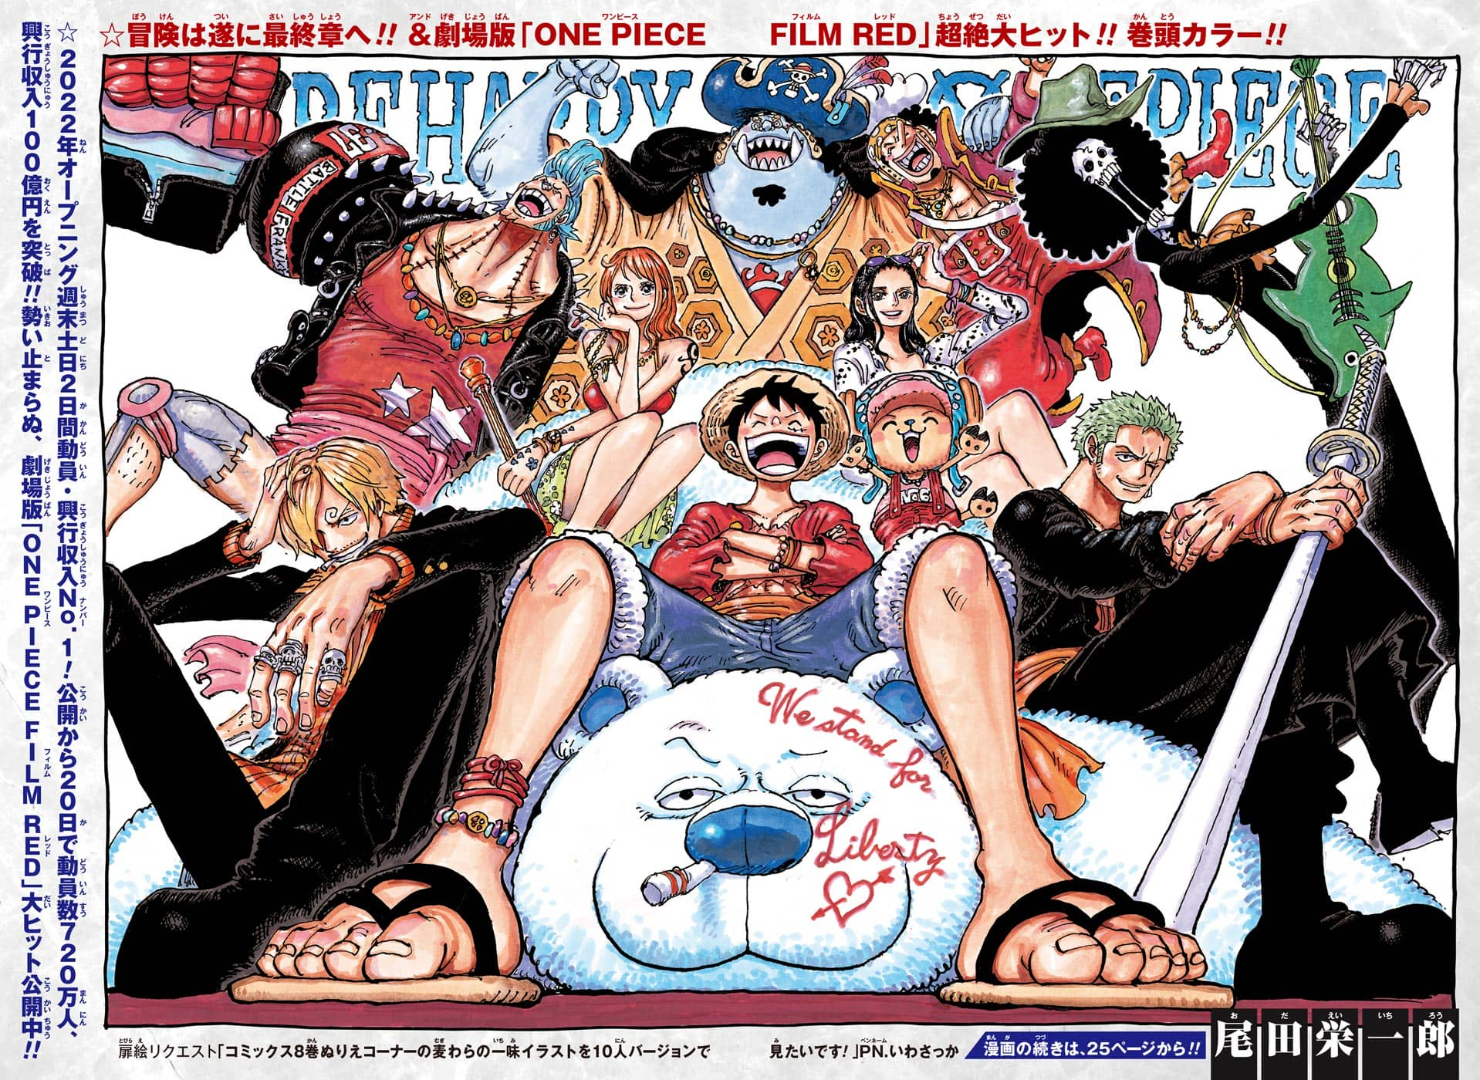 Chapter 1060, One Piece Wiki